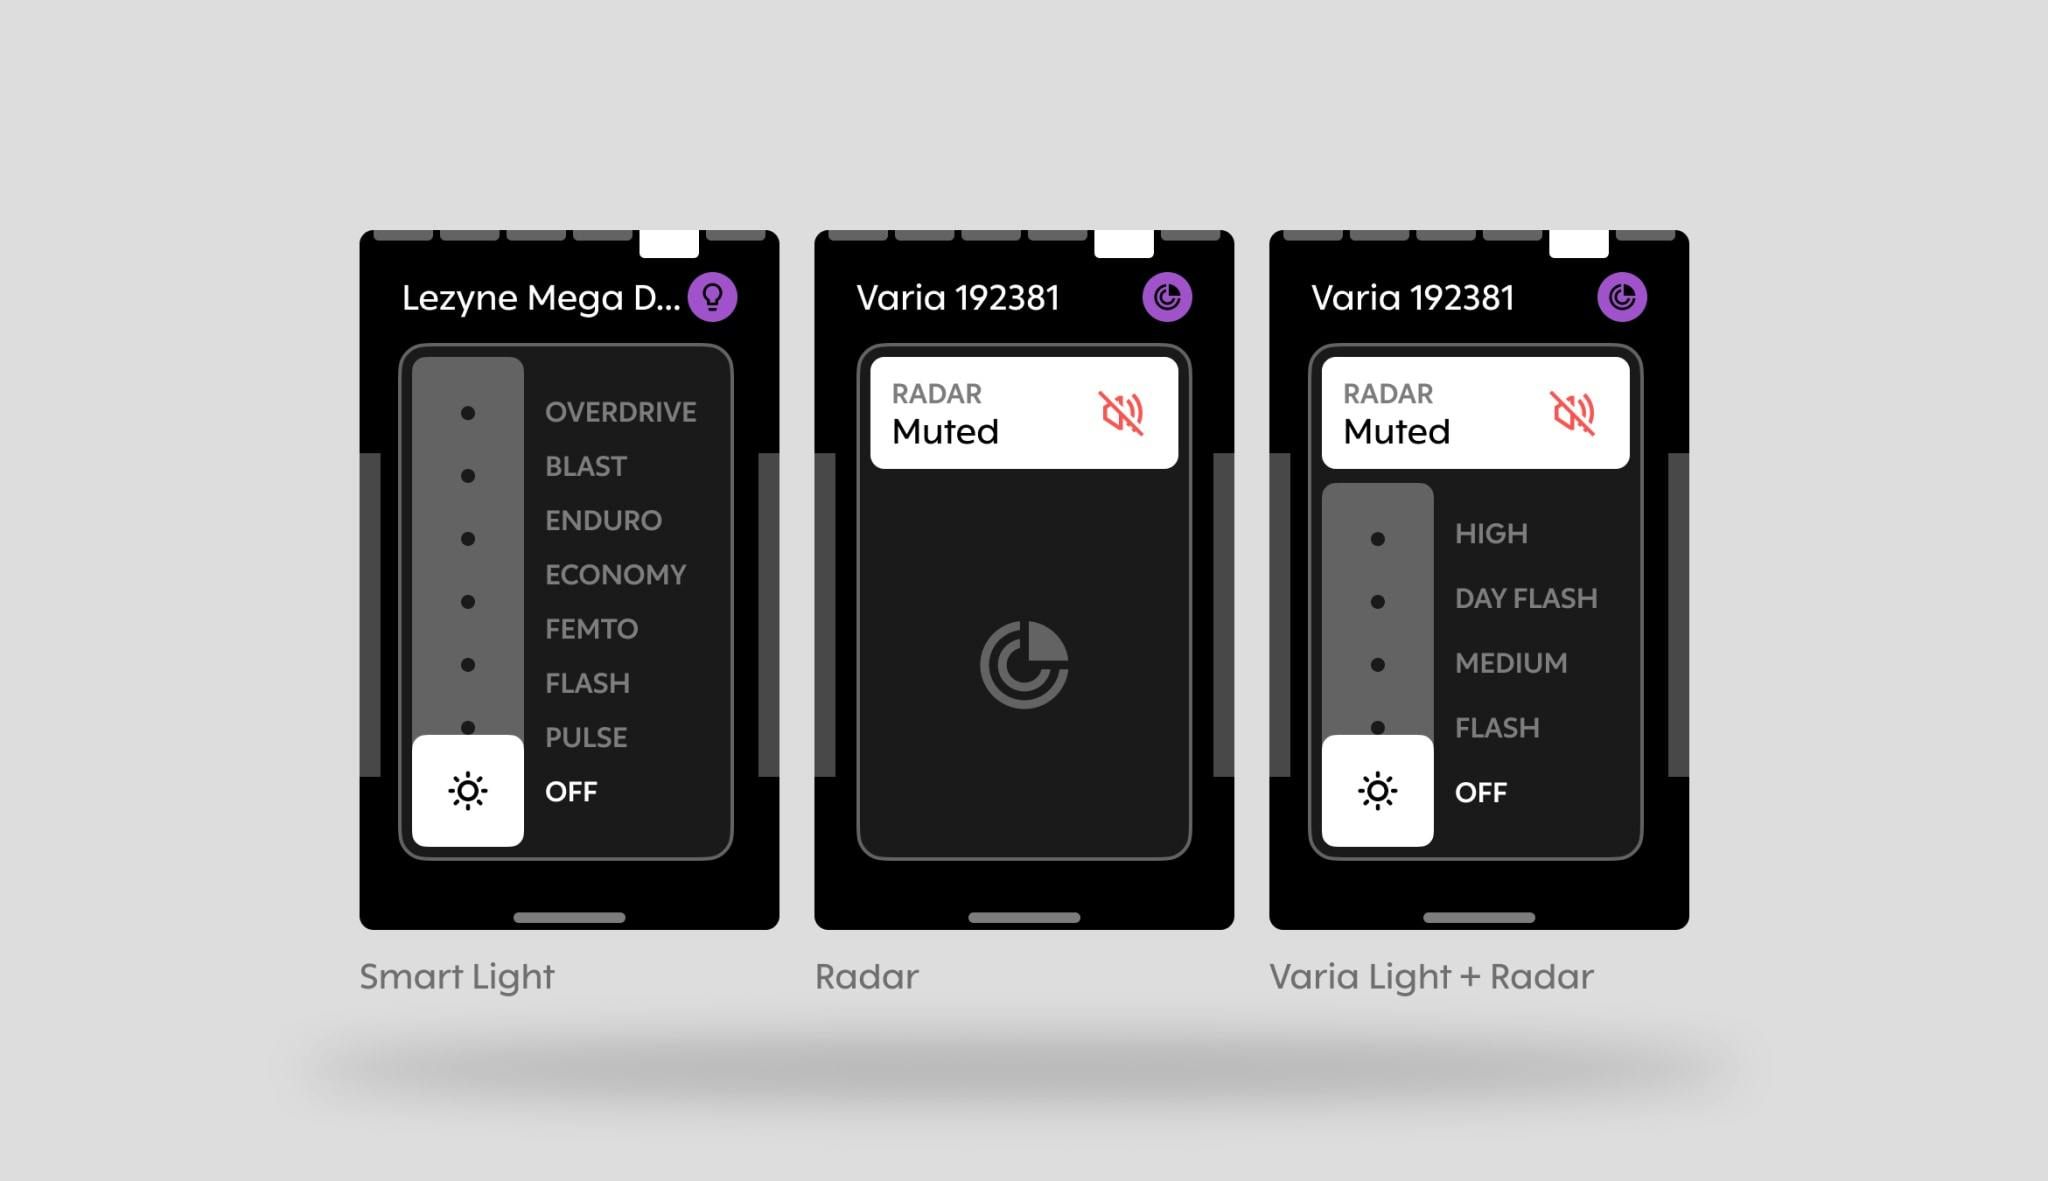 Control center designs to control smart ANT+ lights and radars